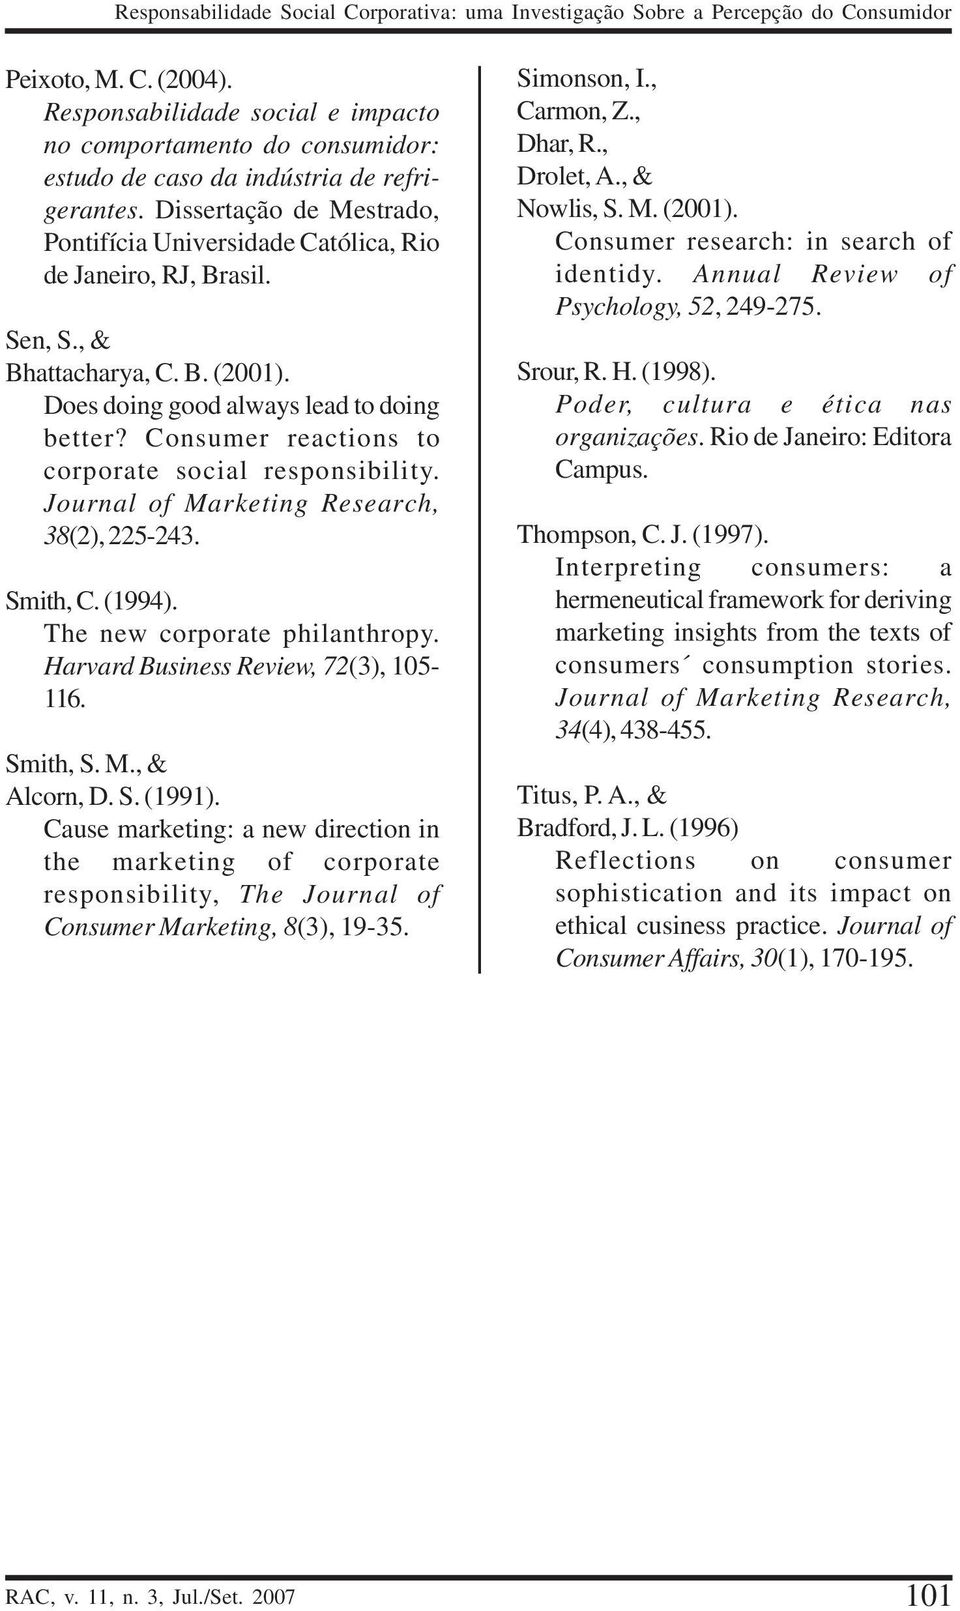 Sen, S., & Bhattacharya, C. B. (2001). Does doing good always lead to doing better? Consumer reactions to corporate social responsibility. Journal of Marketing Research, 38(2), 225-243. Smith, C.